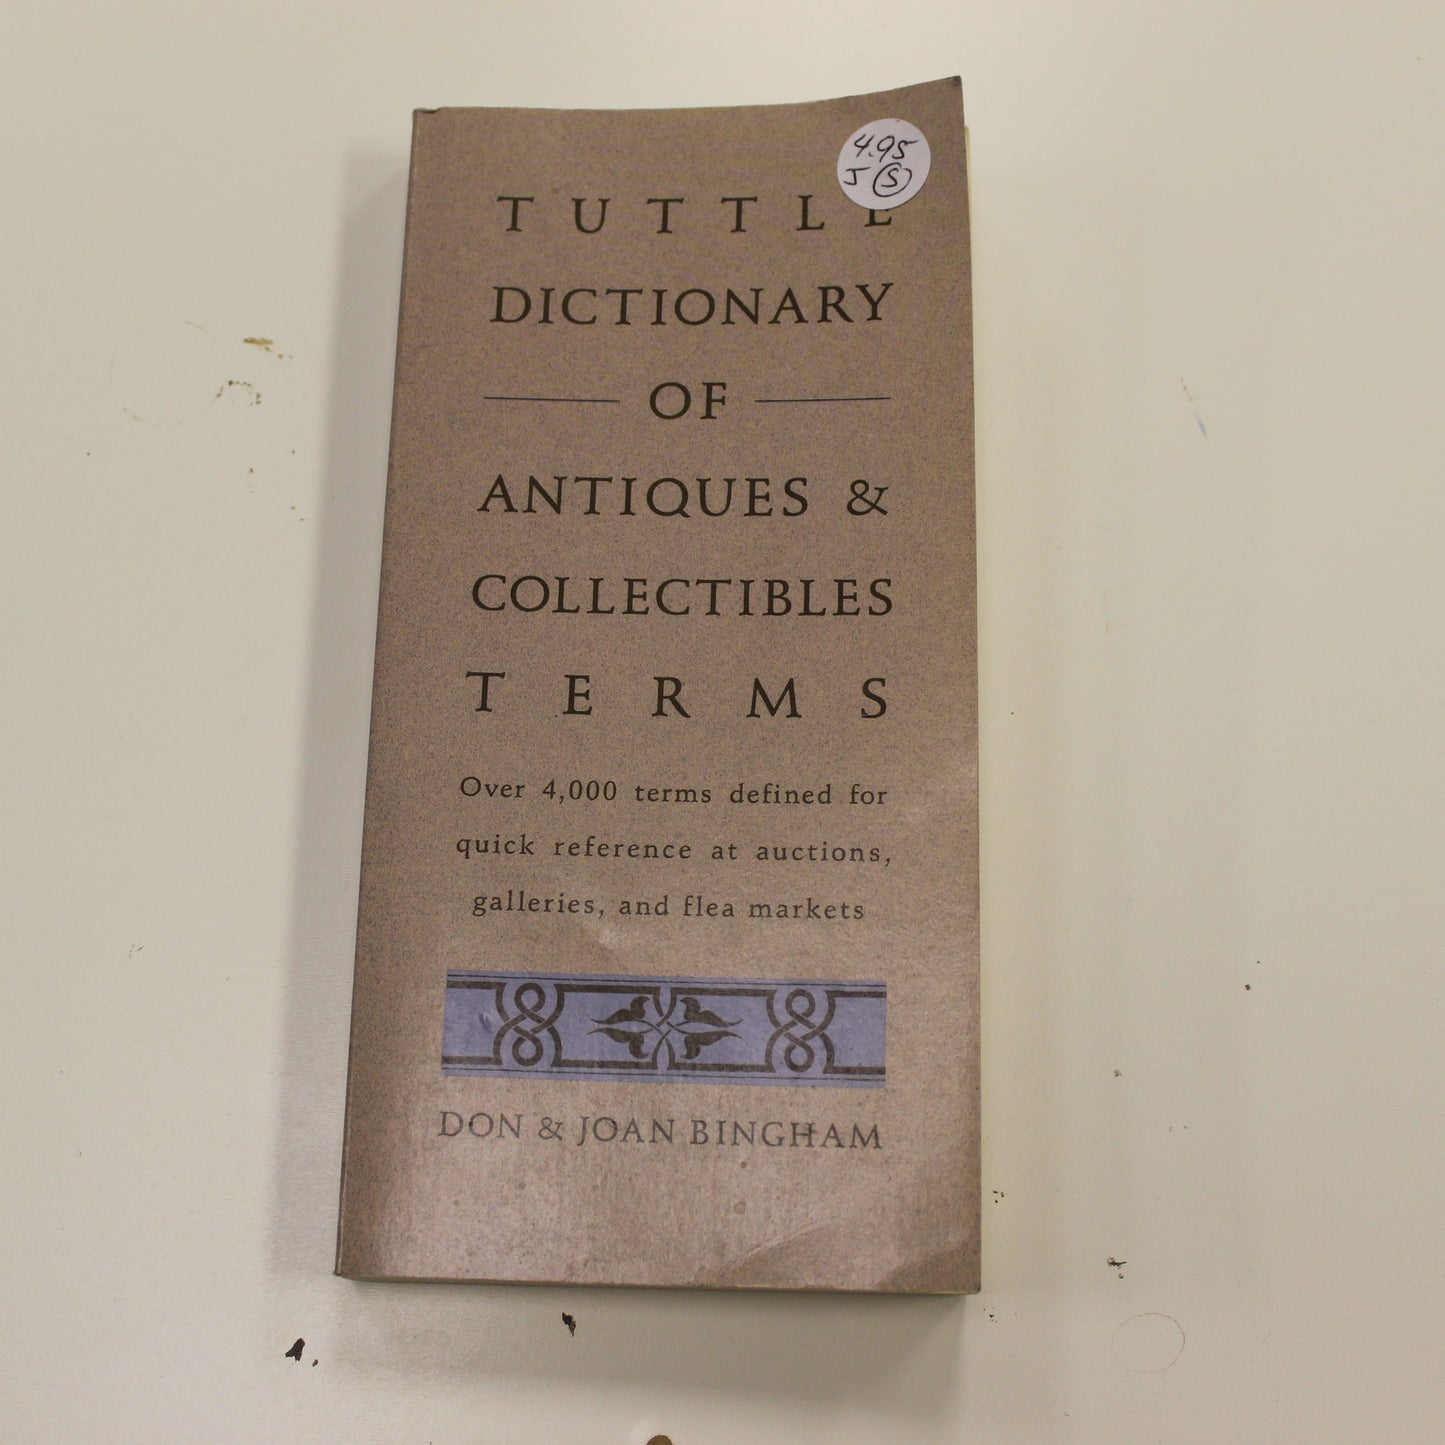 TUTTLE DICTIONARY OF ANTIQUES & COLLECTIBLES TERMS